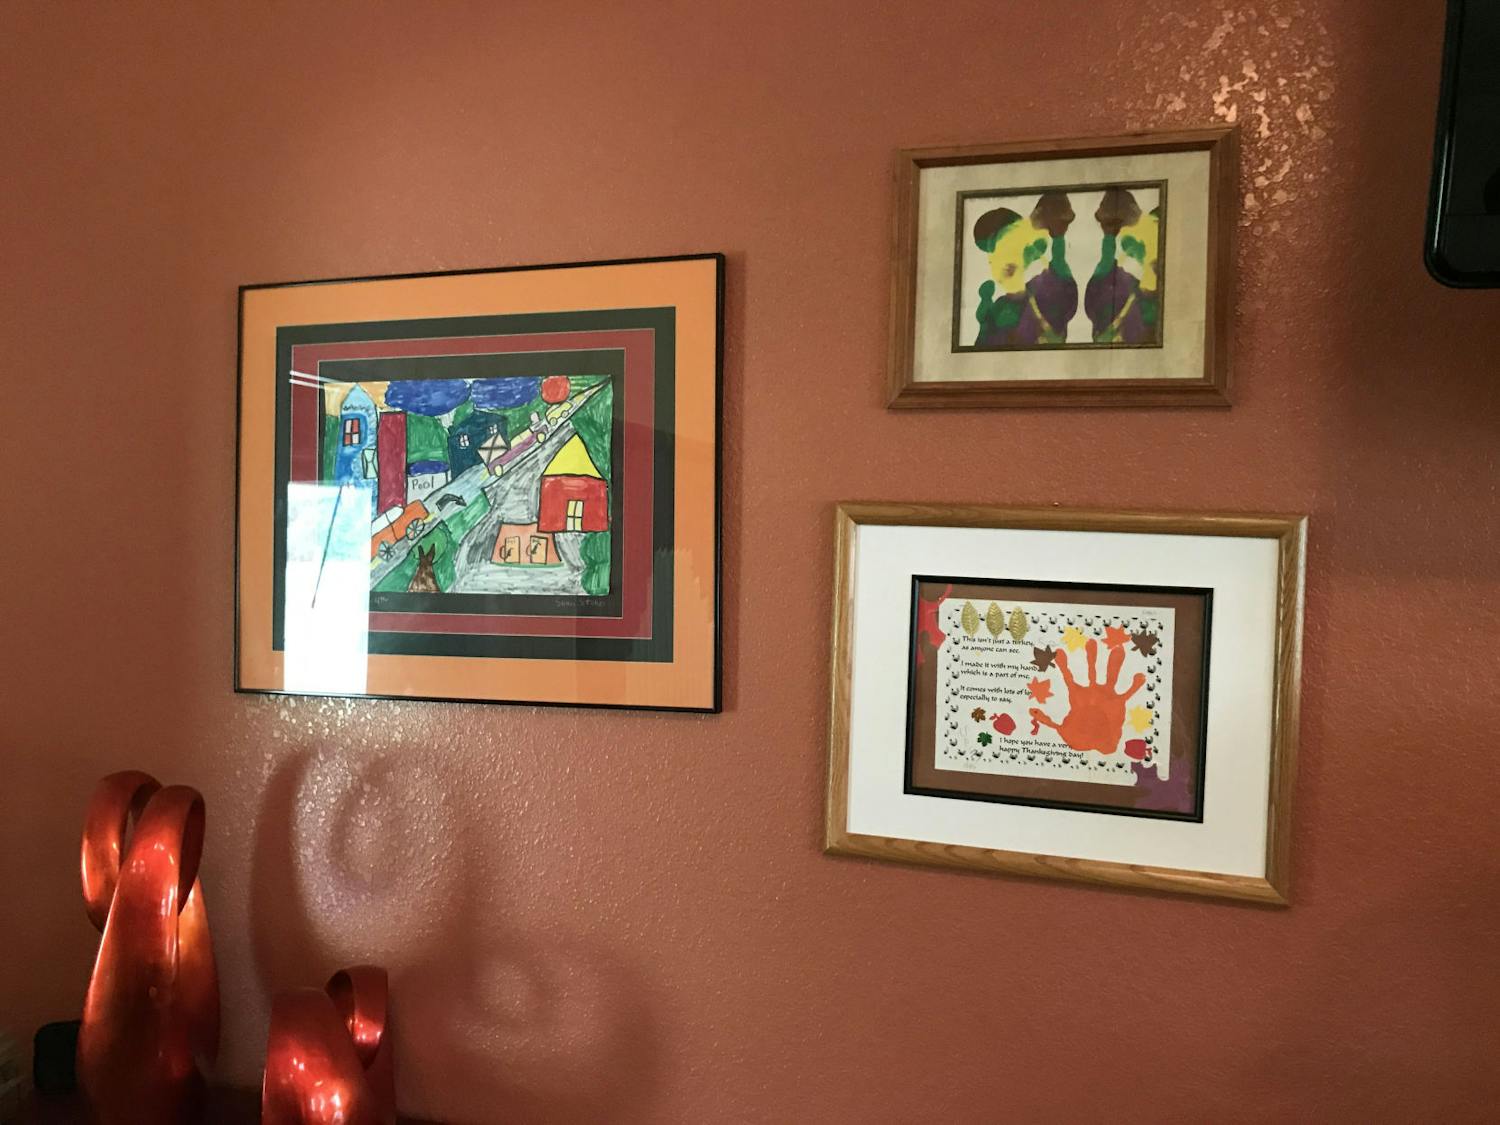 Sean’s paintings hang on the wall in the family’s living room. When he was in fourth grade, Sean’s art was displayed in an exhibition at the Thomas Center in Gainesville.